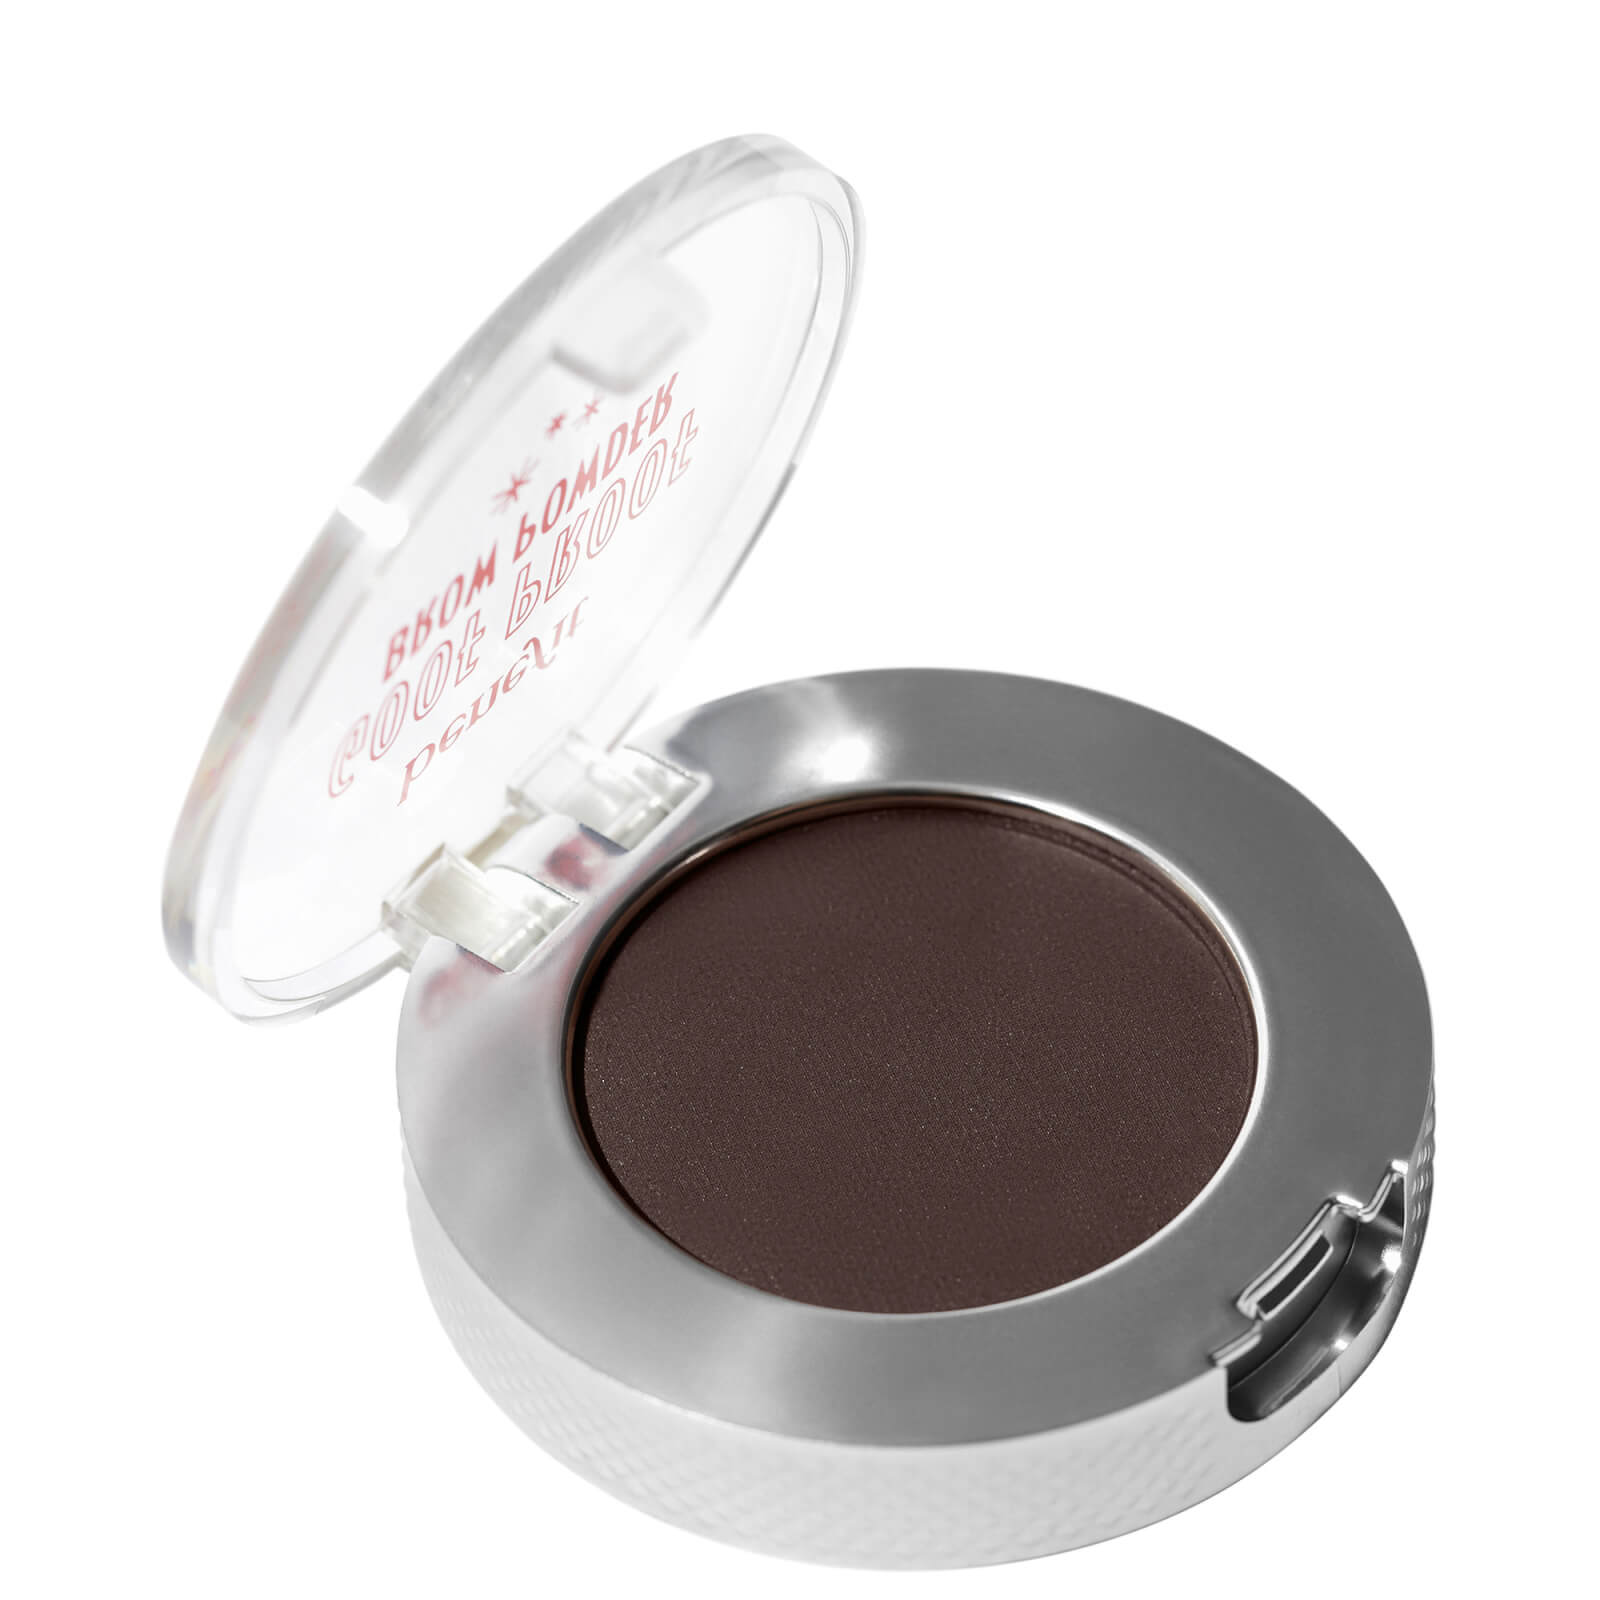 benefit Goof Proof Easy Brow Filling Powder 1.9g (Various Shades) - 05 Warm Black-Brown